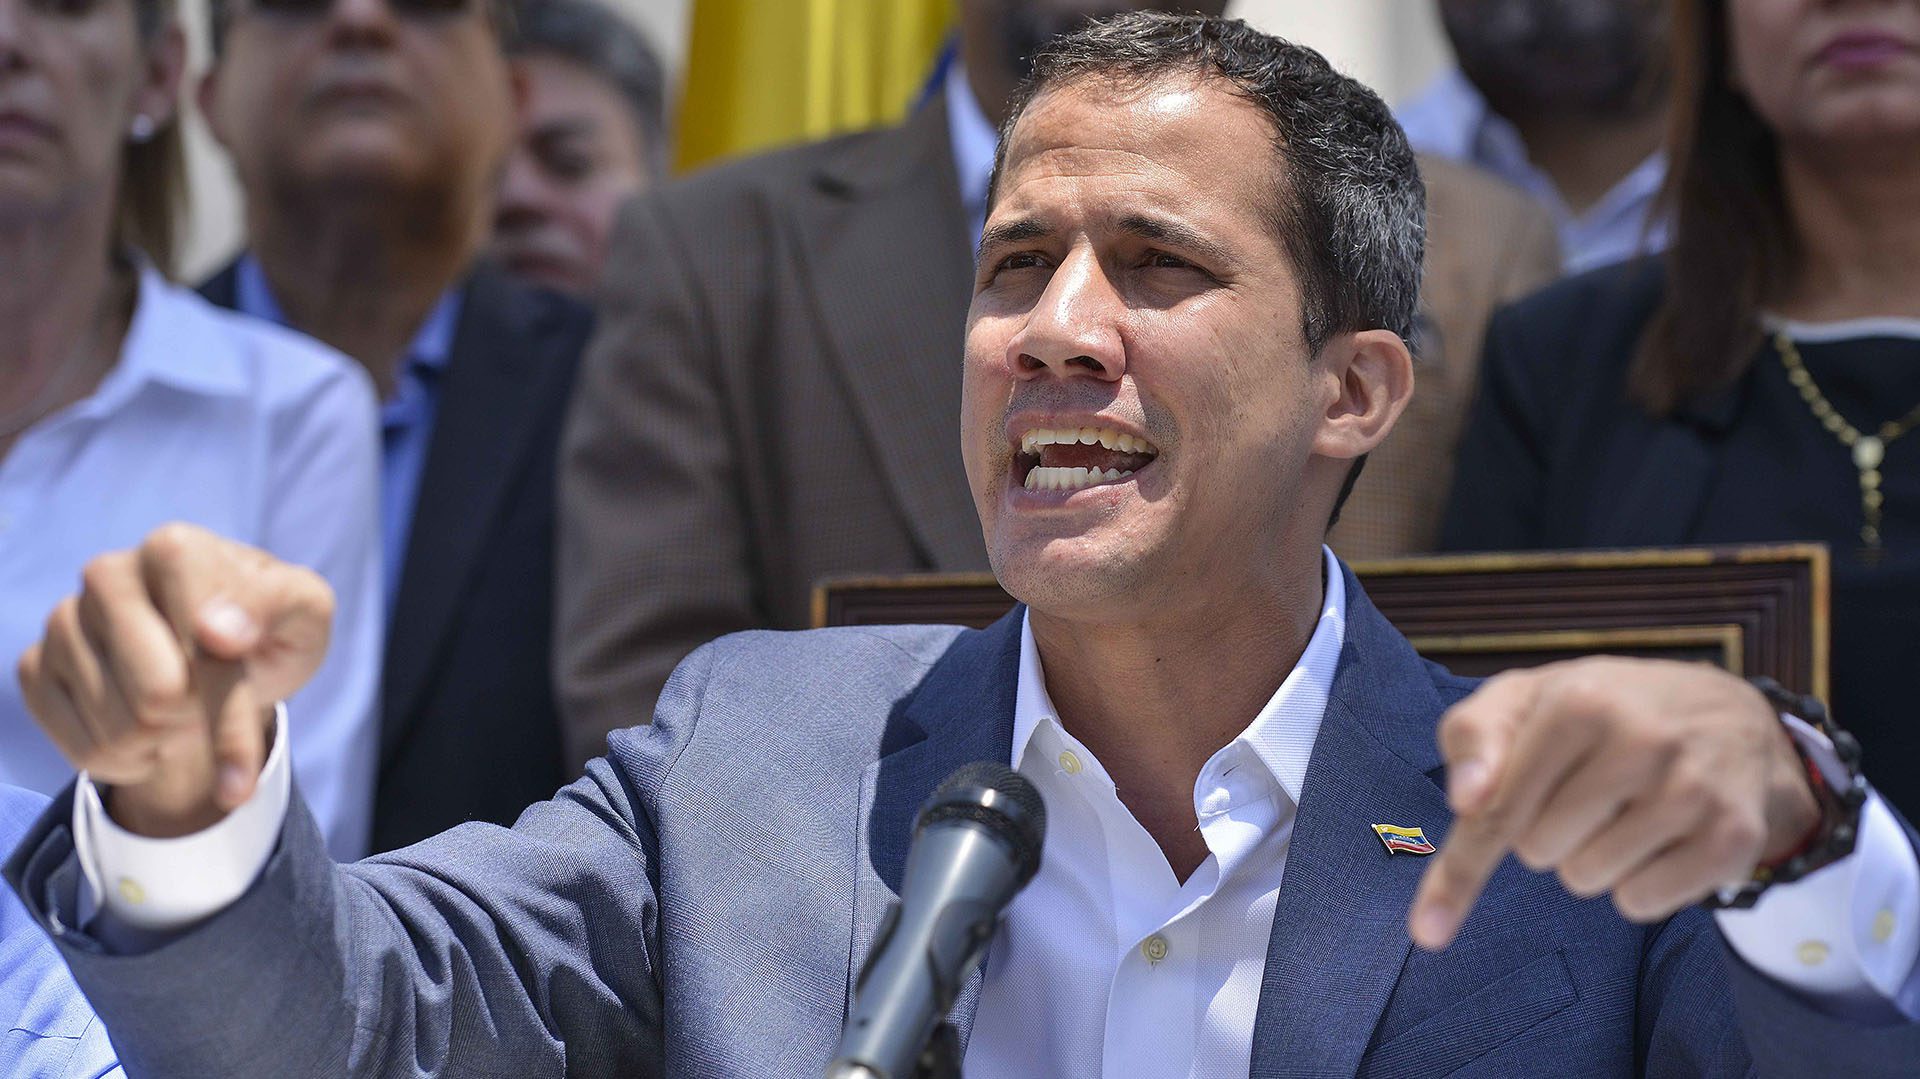 Venezuelan opposition leader and self-proclaimed acting president Juan Guaido speaks during a press conference at the Venezuelan National Assembly in Caracas on March 10, 2019. - Sunday is the third day Venezuelans remain without communications, electricity or water, in an unprecedented power outage that already left 15 patients dead and threatens with extending indefinitely, increasing distress for the severe political and economic crisis hitting the oil-rich South American nation. (Photo by Matias DELACROIX / AFP)